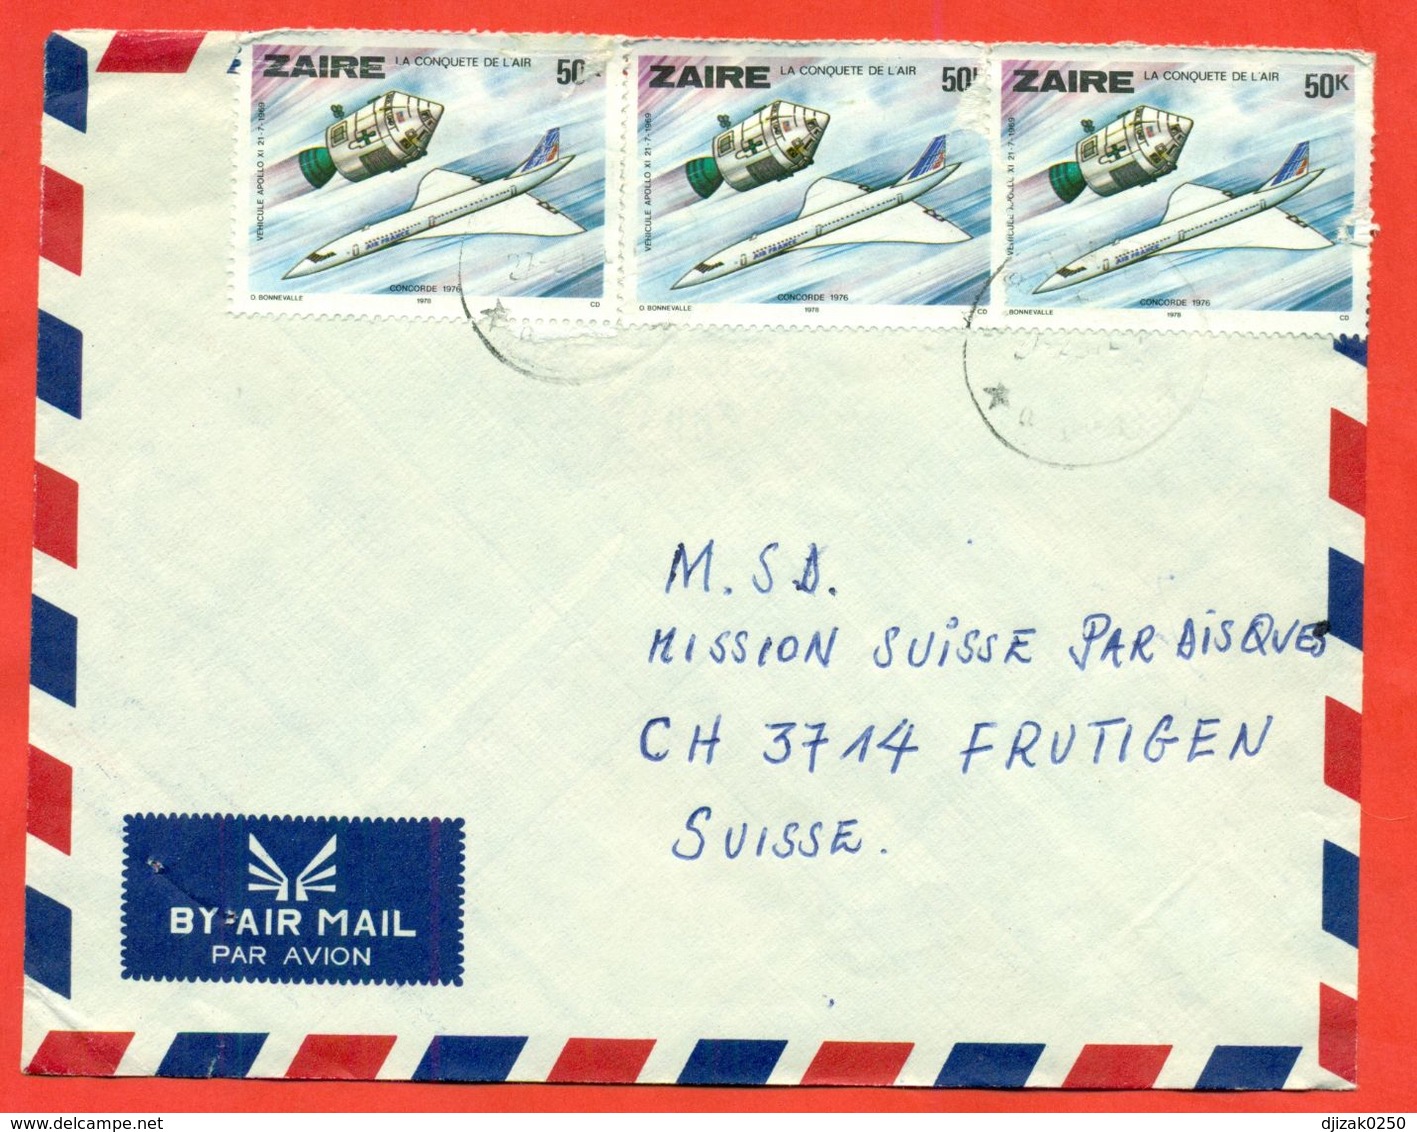 Zaire 1978.Envelope Really Passed The Mail.Aircraft And Spacecraft. - Africa (Other)